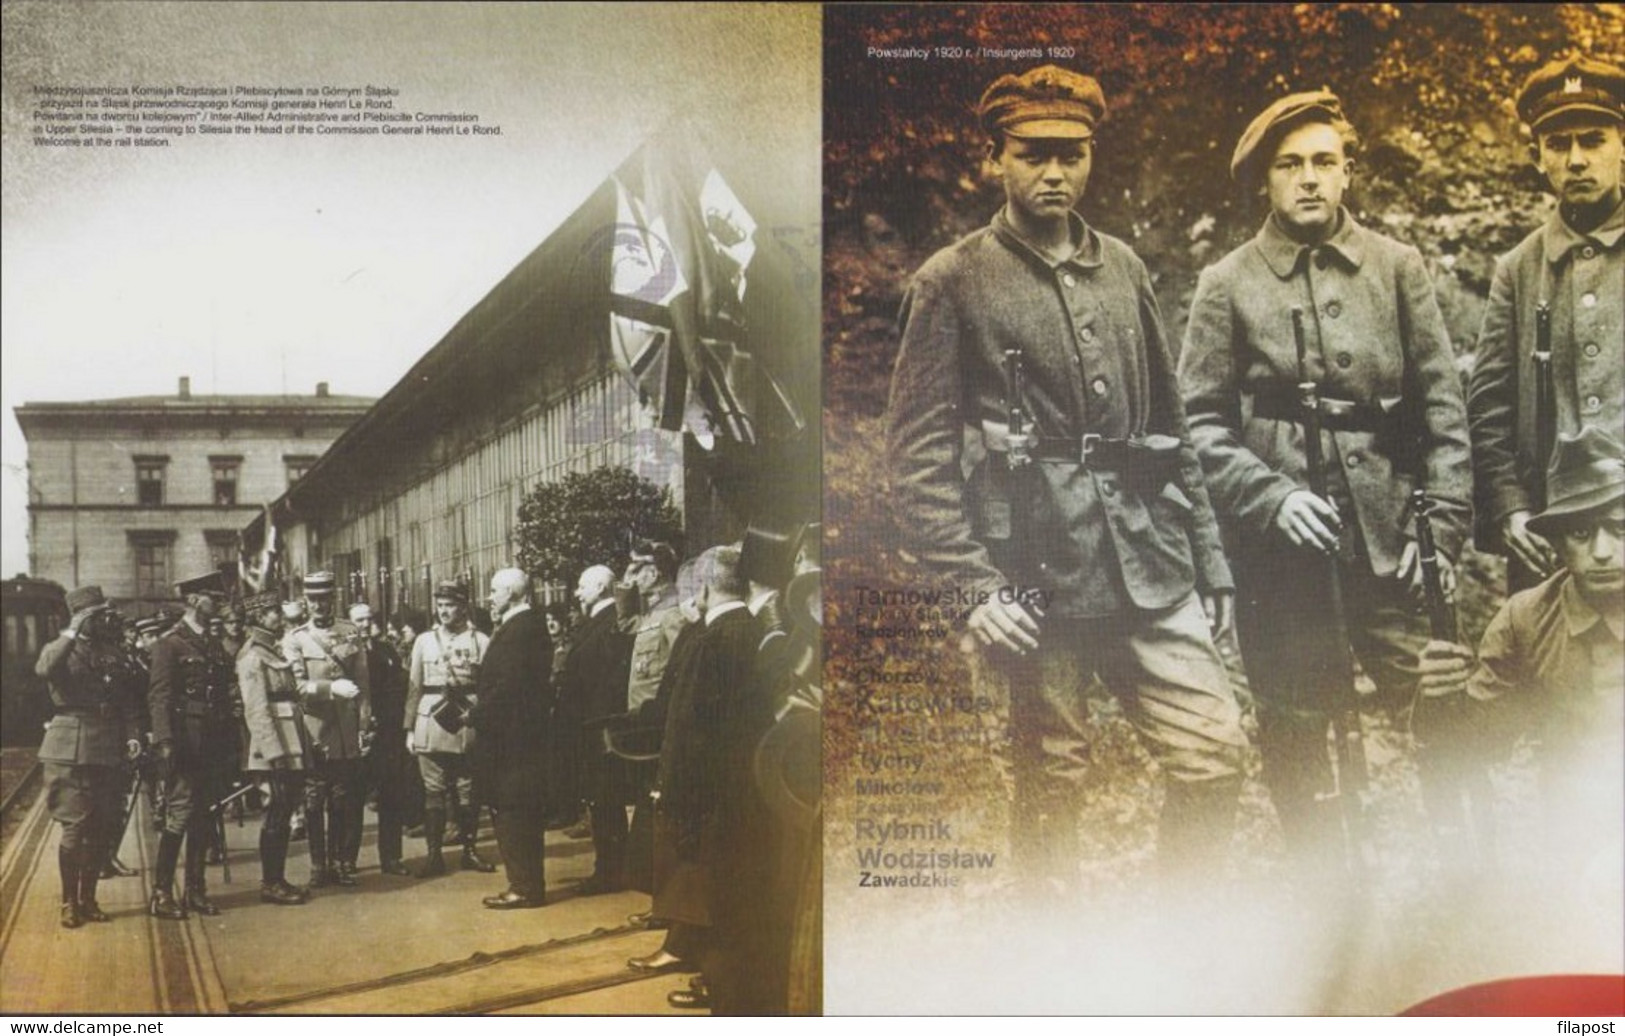 Poland 2020 Souvenir Booklet / Silesian Uprisings 1920, Andrzej Mielecki Activist Doctor / With Stamp MNH**FV - Carnets